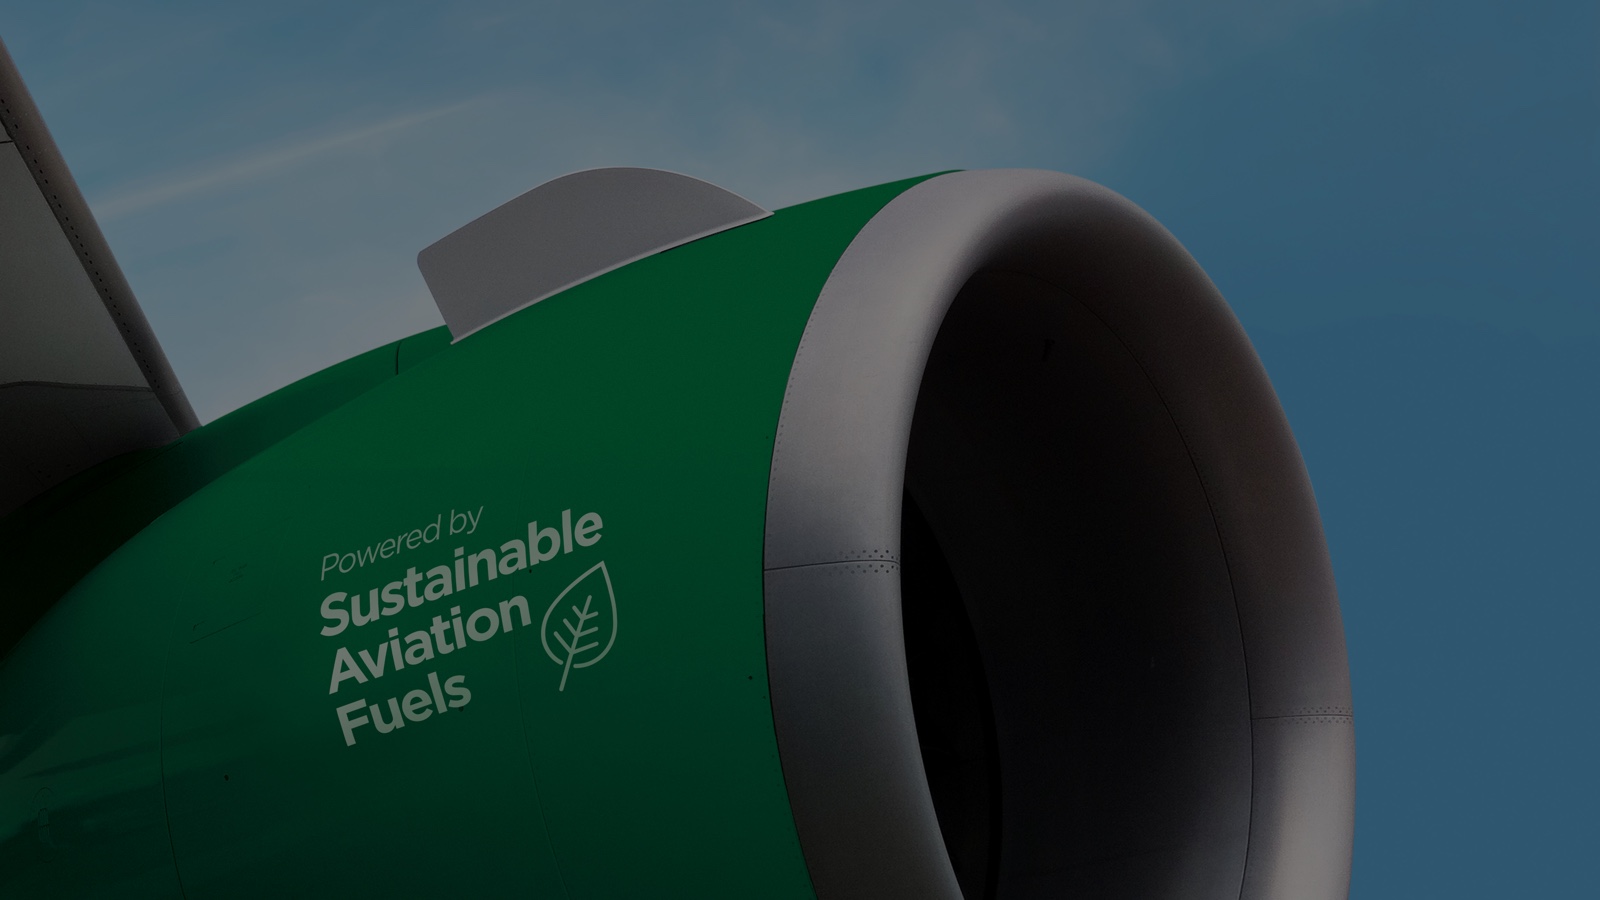 RAF delivers world’s first flight using 100% net-zero synthetic fuel